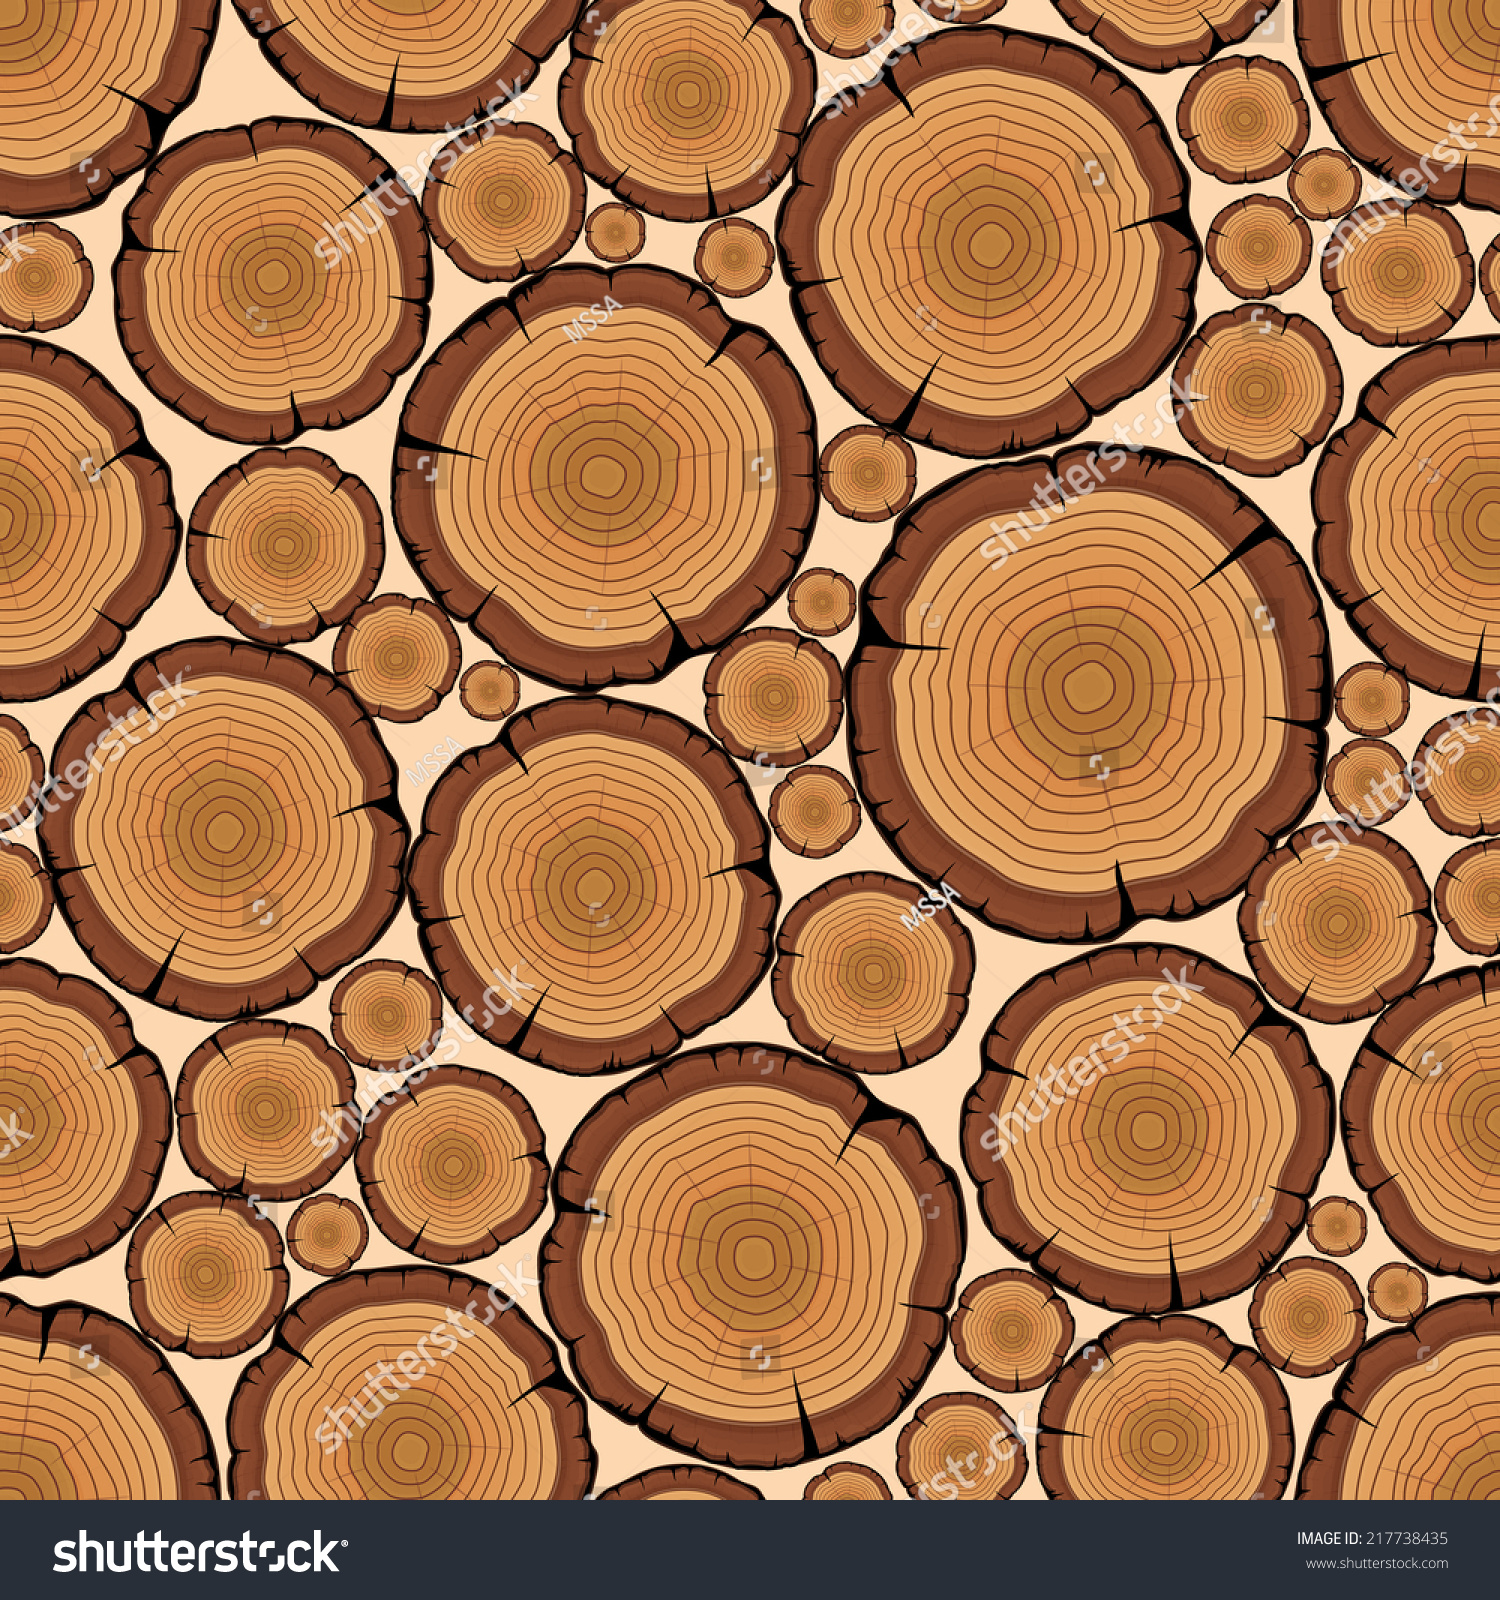 Seamless Pattern With Tree Rings. Vector Background - 217738435 ...